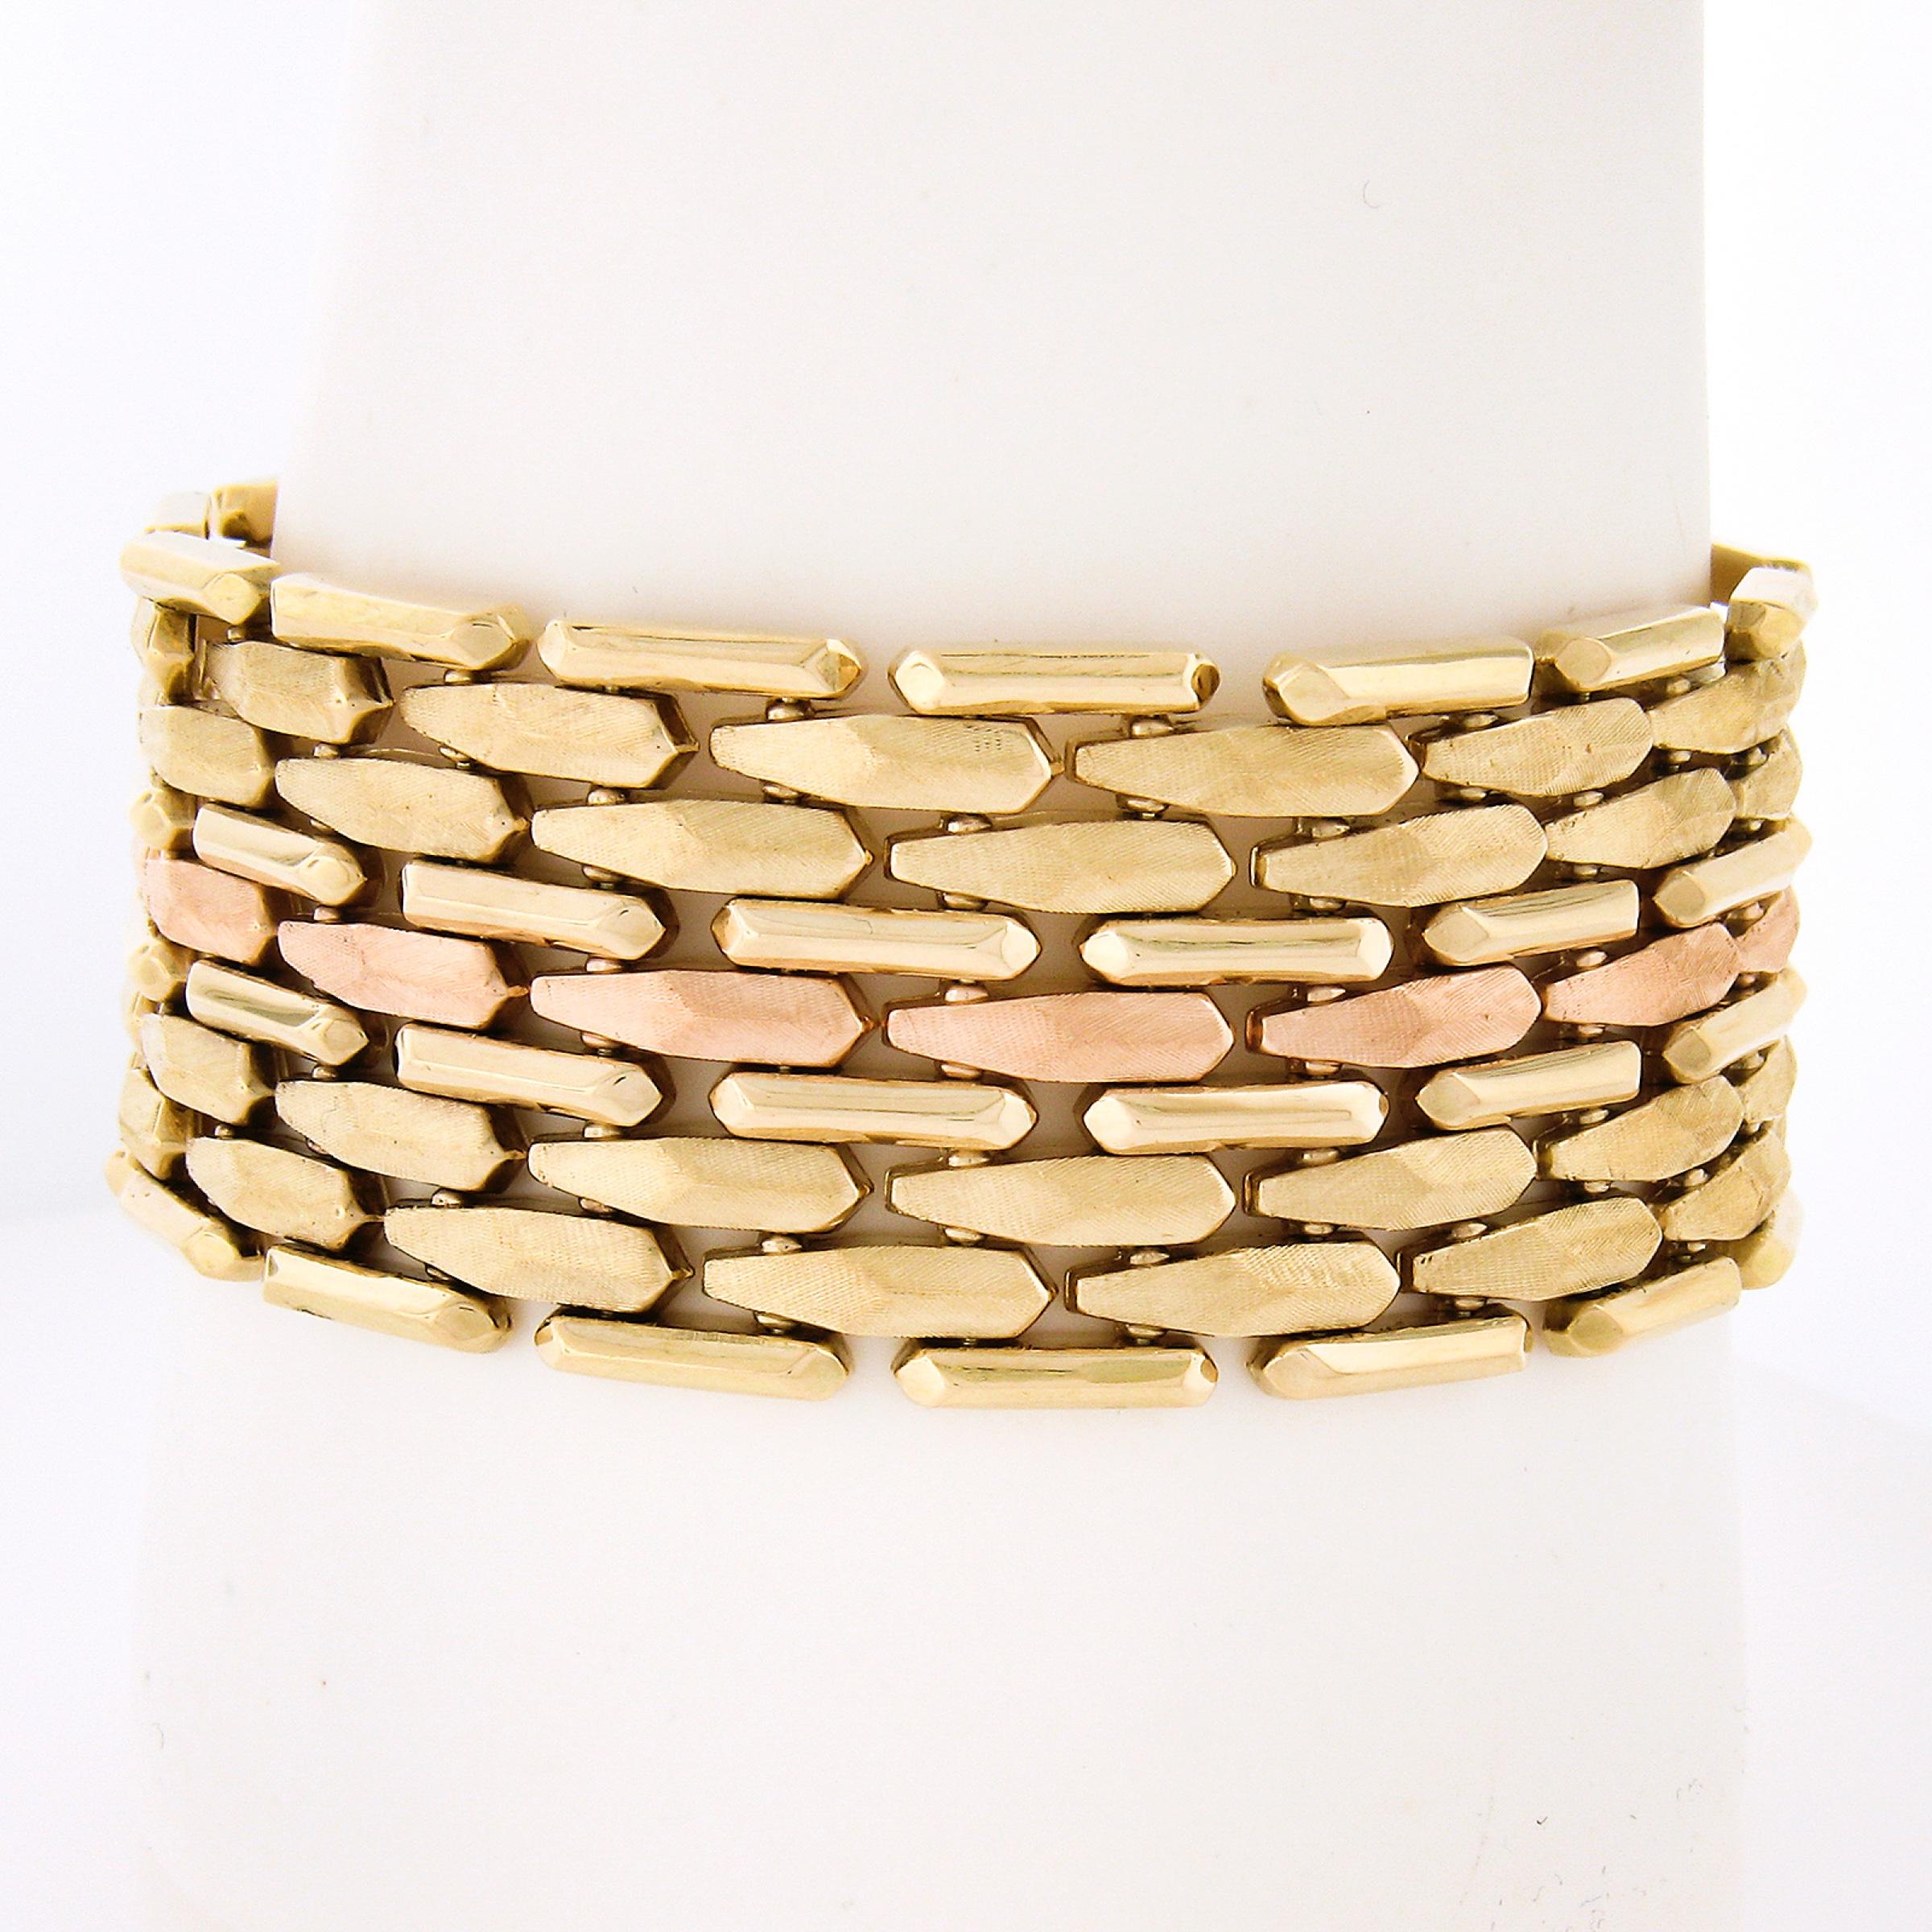 A gorgeous vintage bracelet that was crafted in solid 14k yellow & rose gold. This wide strap bracelet is constructed from multiple rows with textured and faceted polished links throughout. It is approximately 1 inch wide and has a flexible and